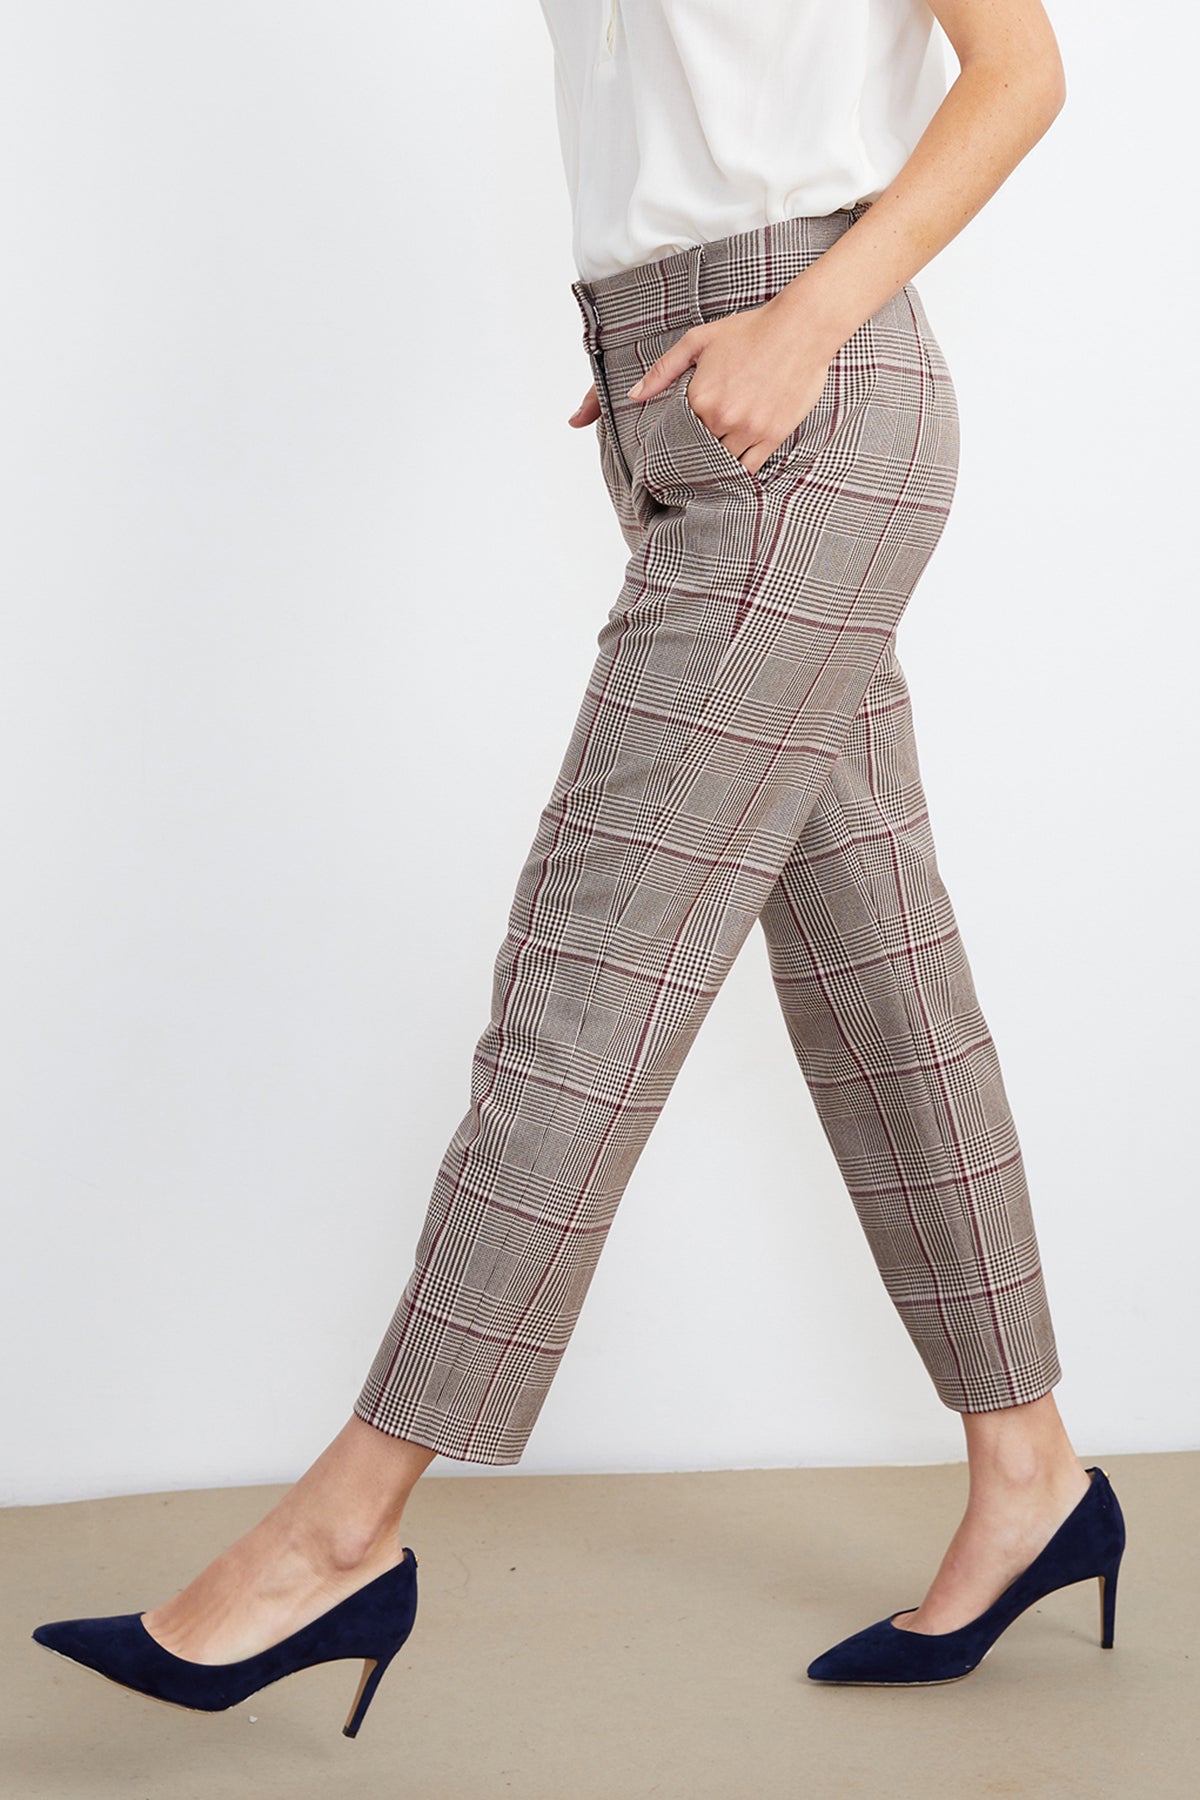 ASOS DESIGN bengaline flared suit pants in gray check - ShopStyle